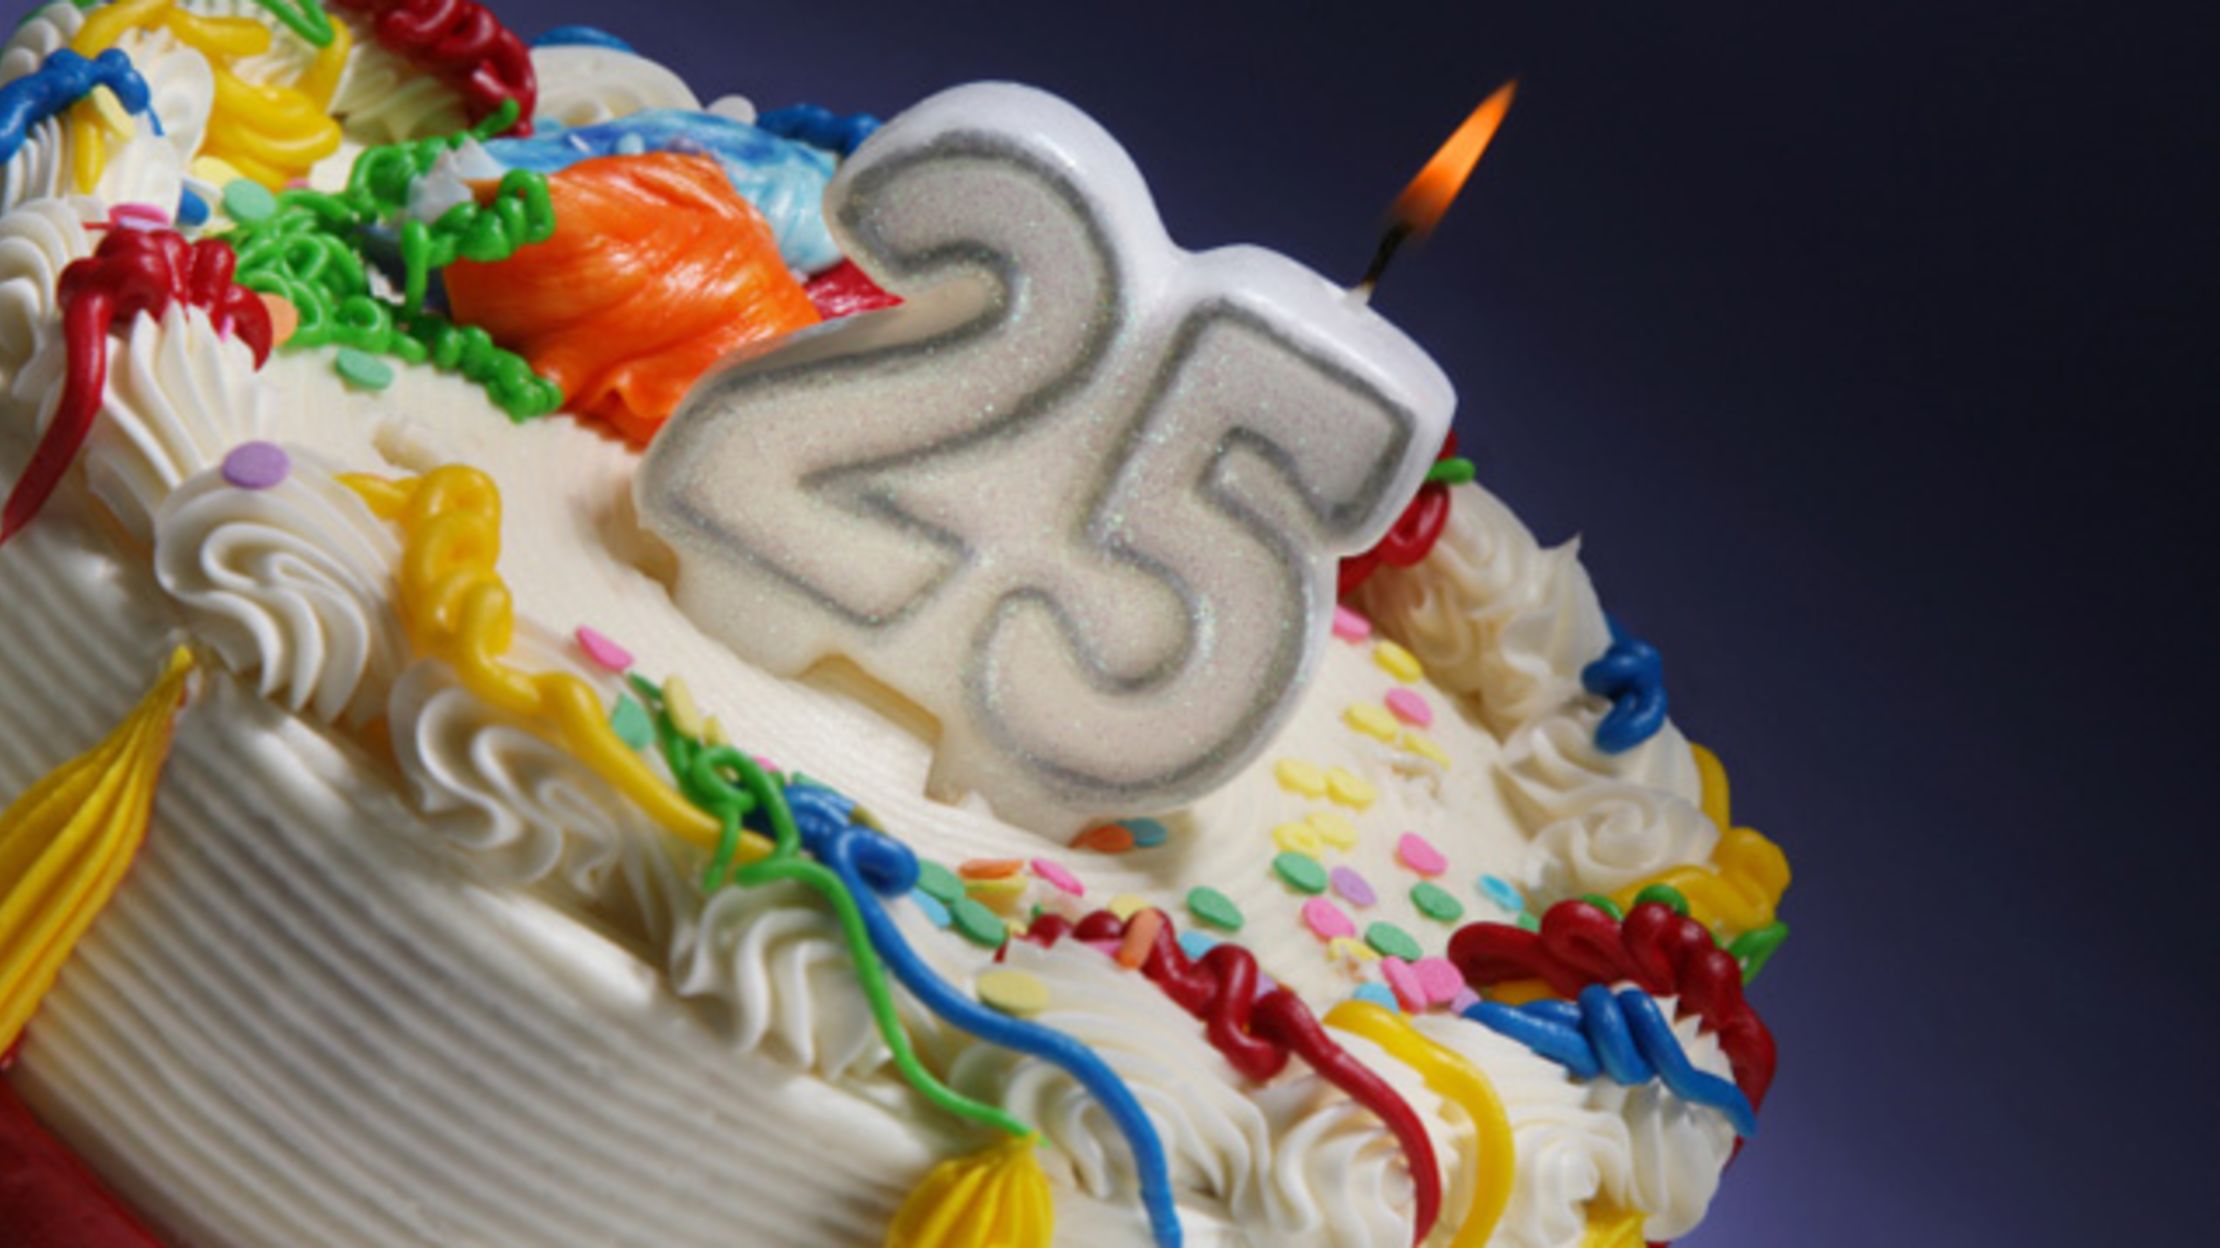 25 Things Turning 25 This Year Mental Floss